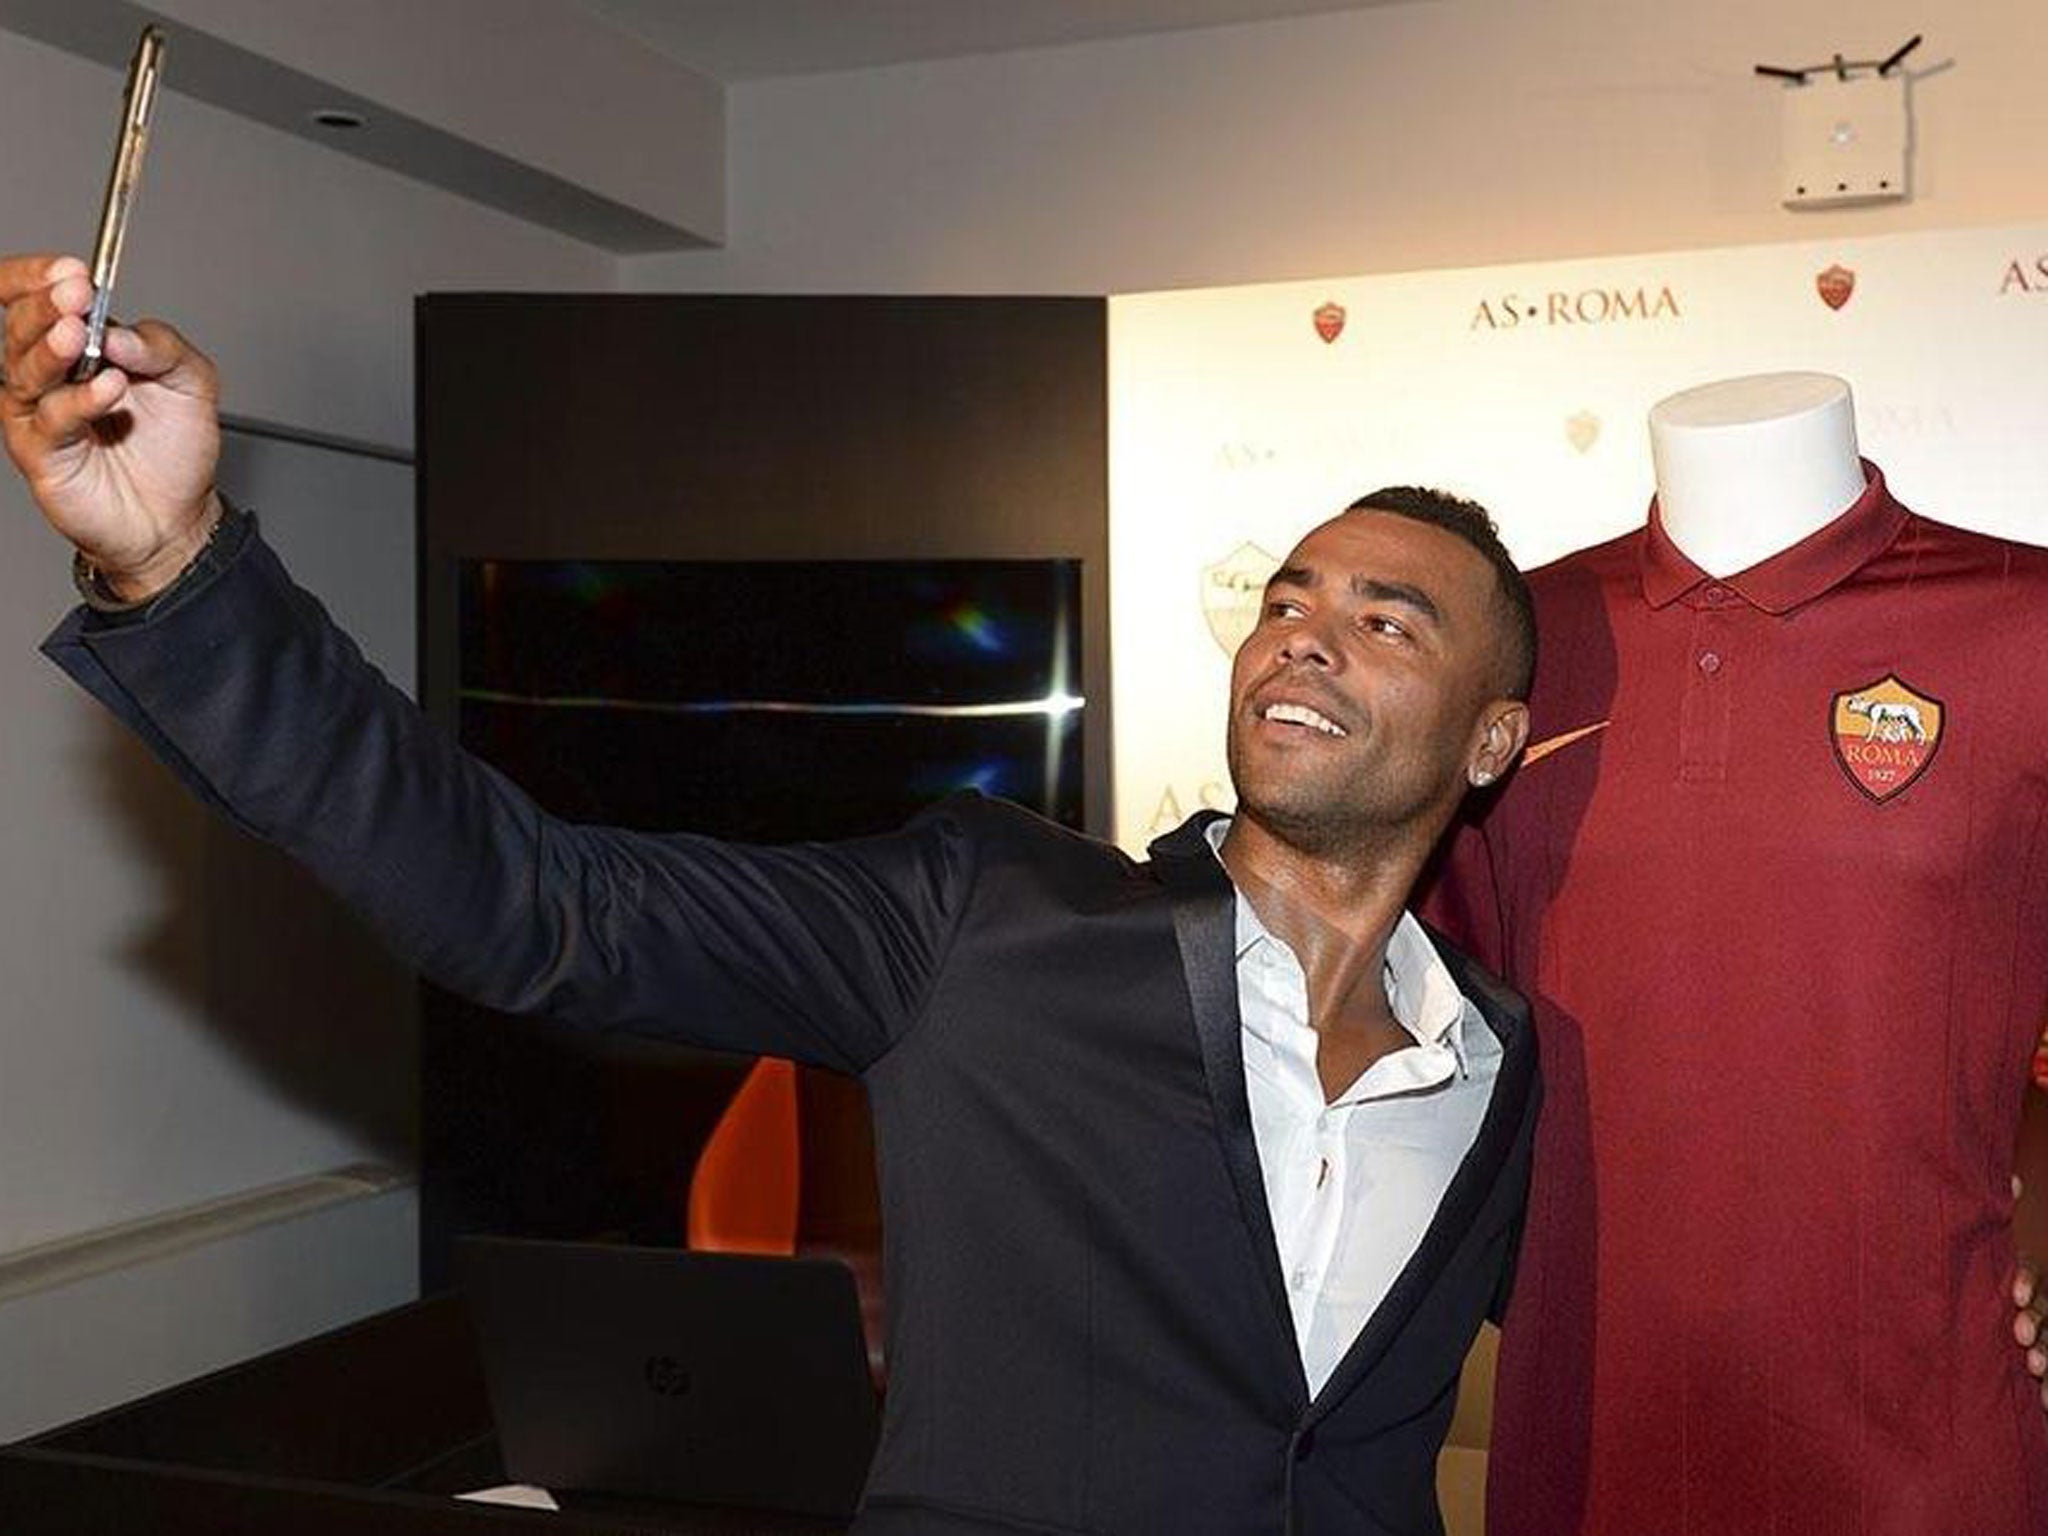 Ashley Cole has joined Roma after being released from his Chelsea contract